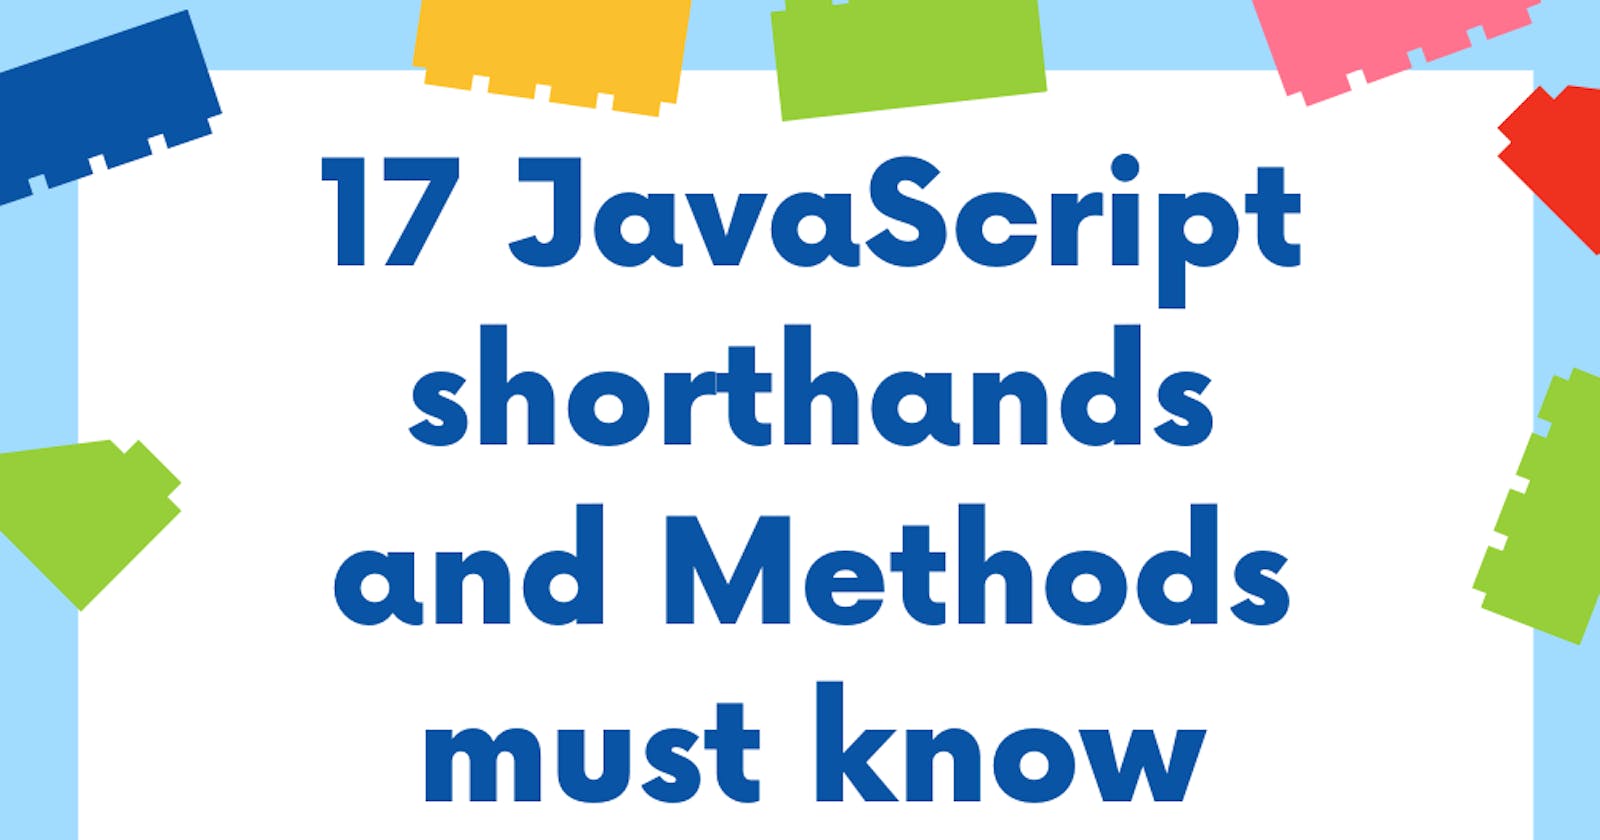 17 Javascript methods and shorthands must know